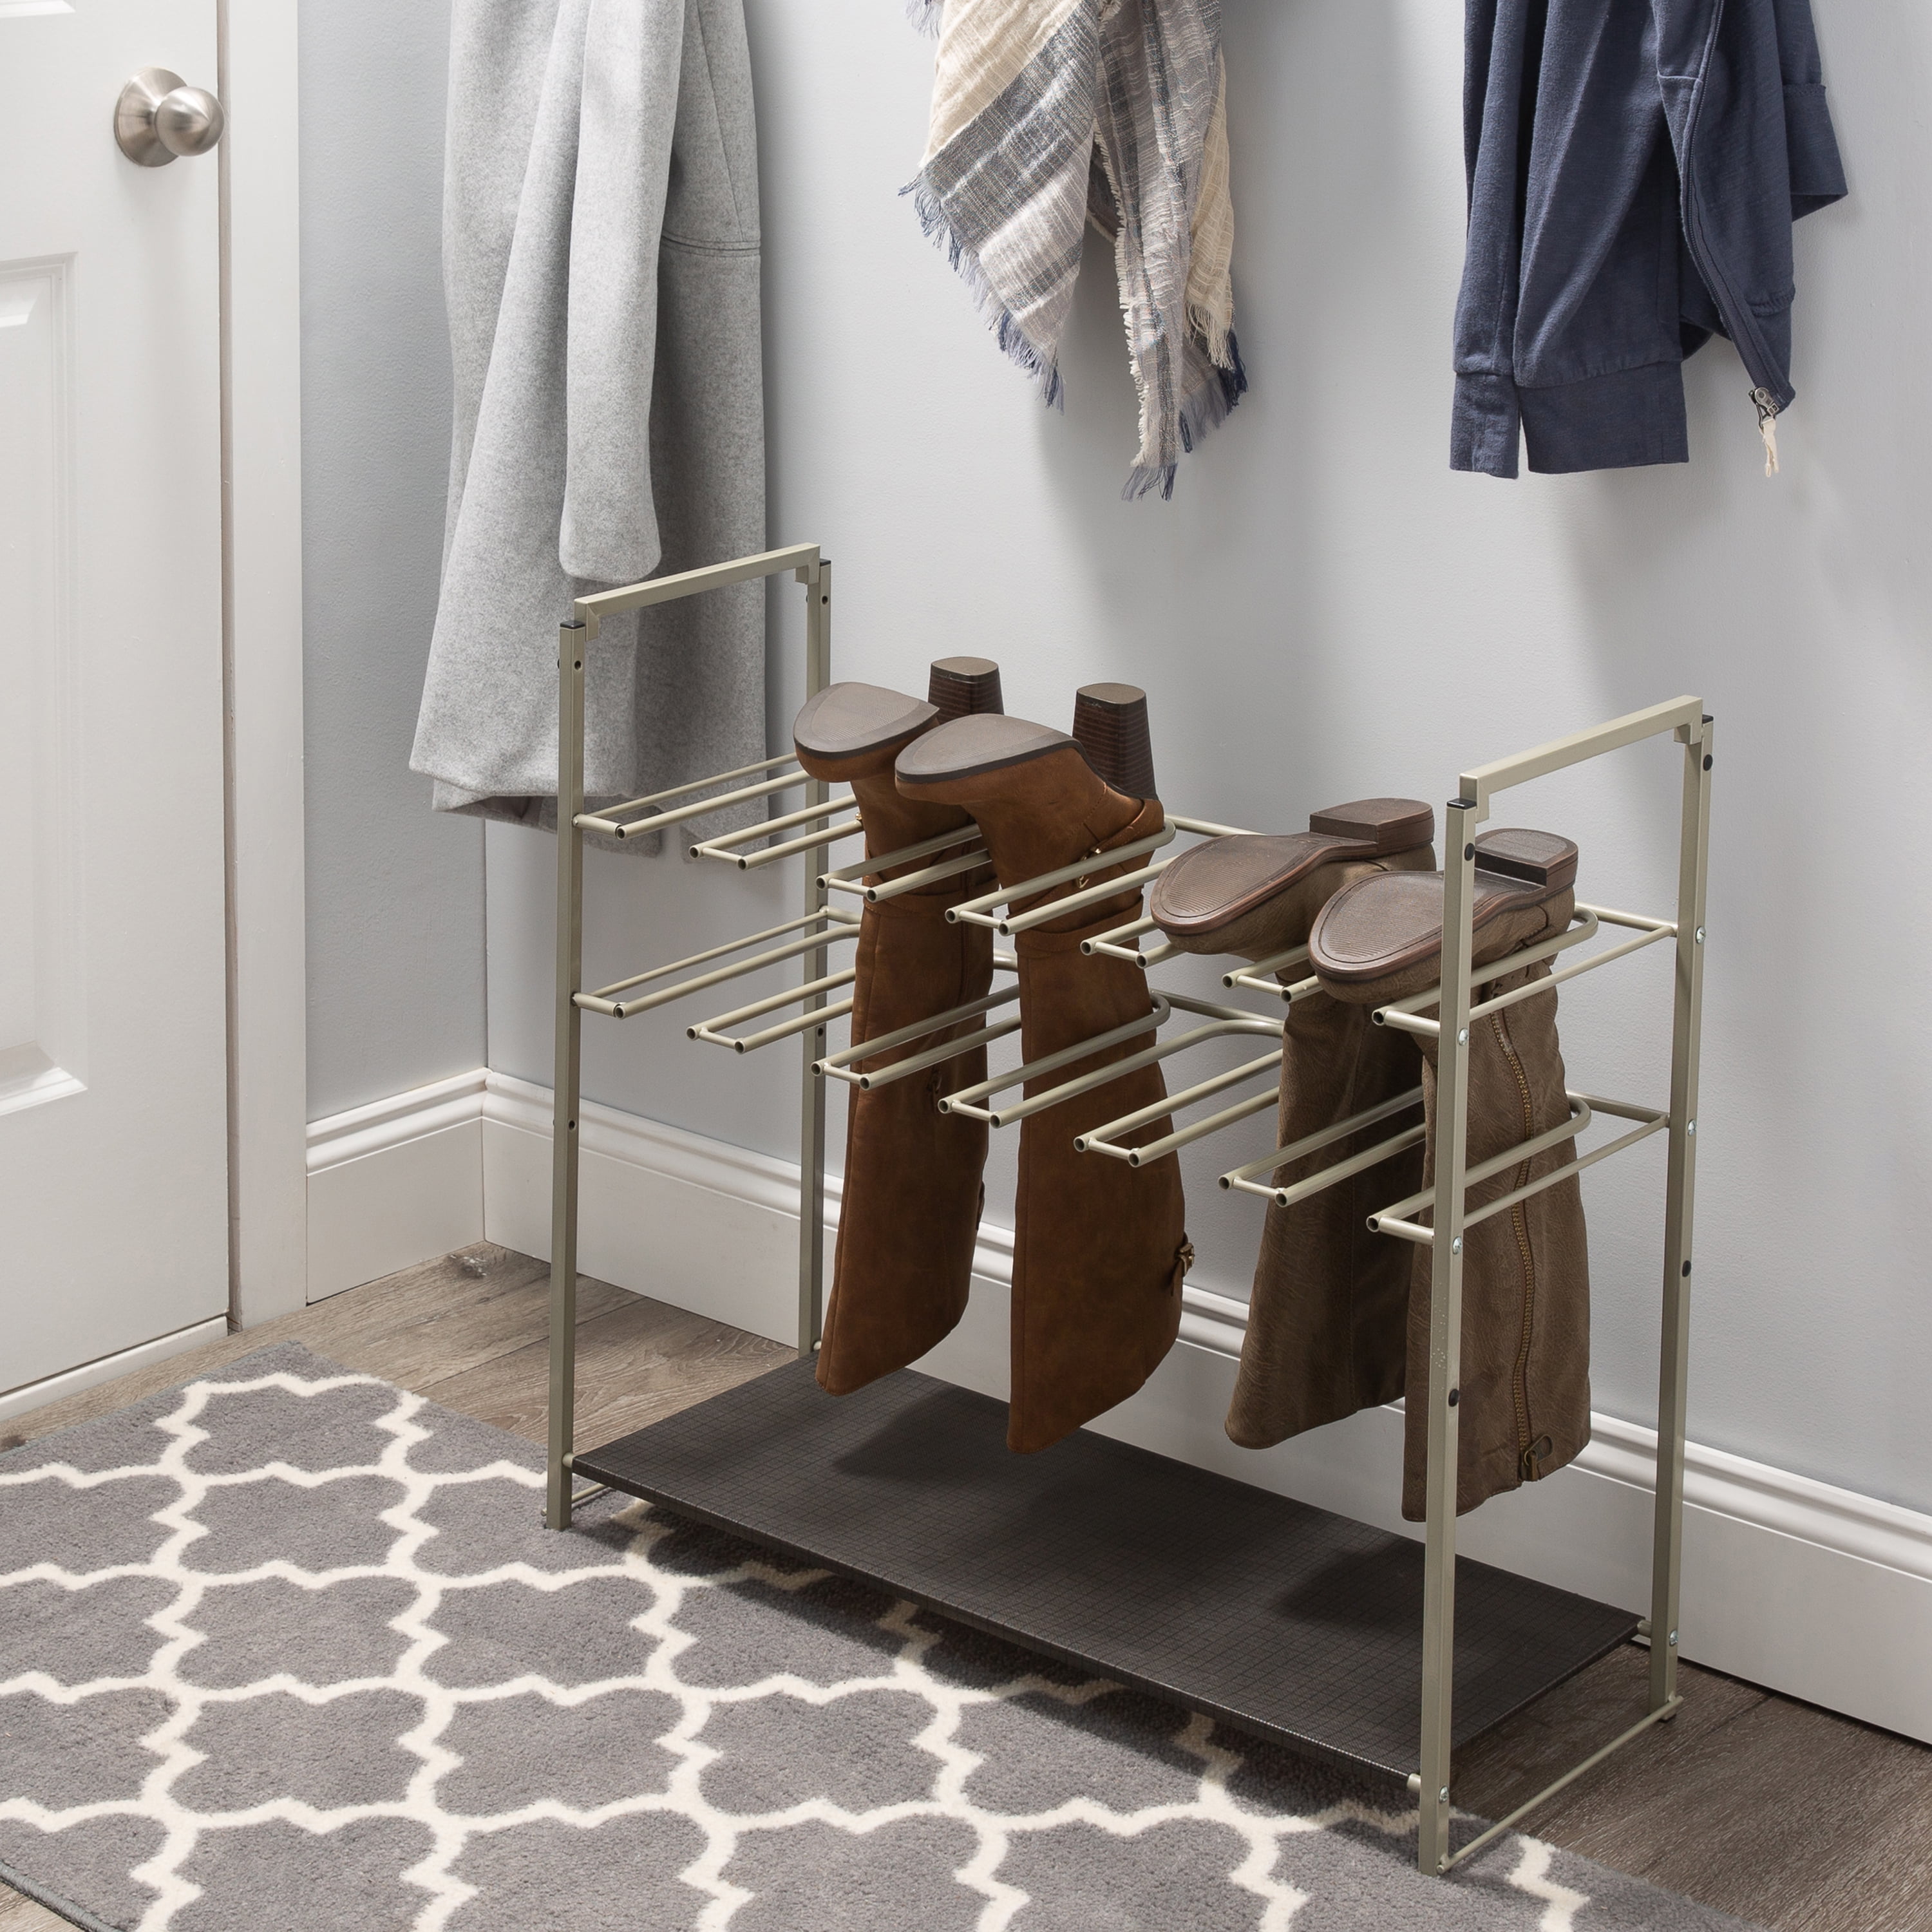 Target Shoppers Love This All-In-One Boot and Shoe Organizer